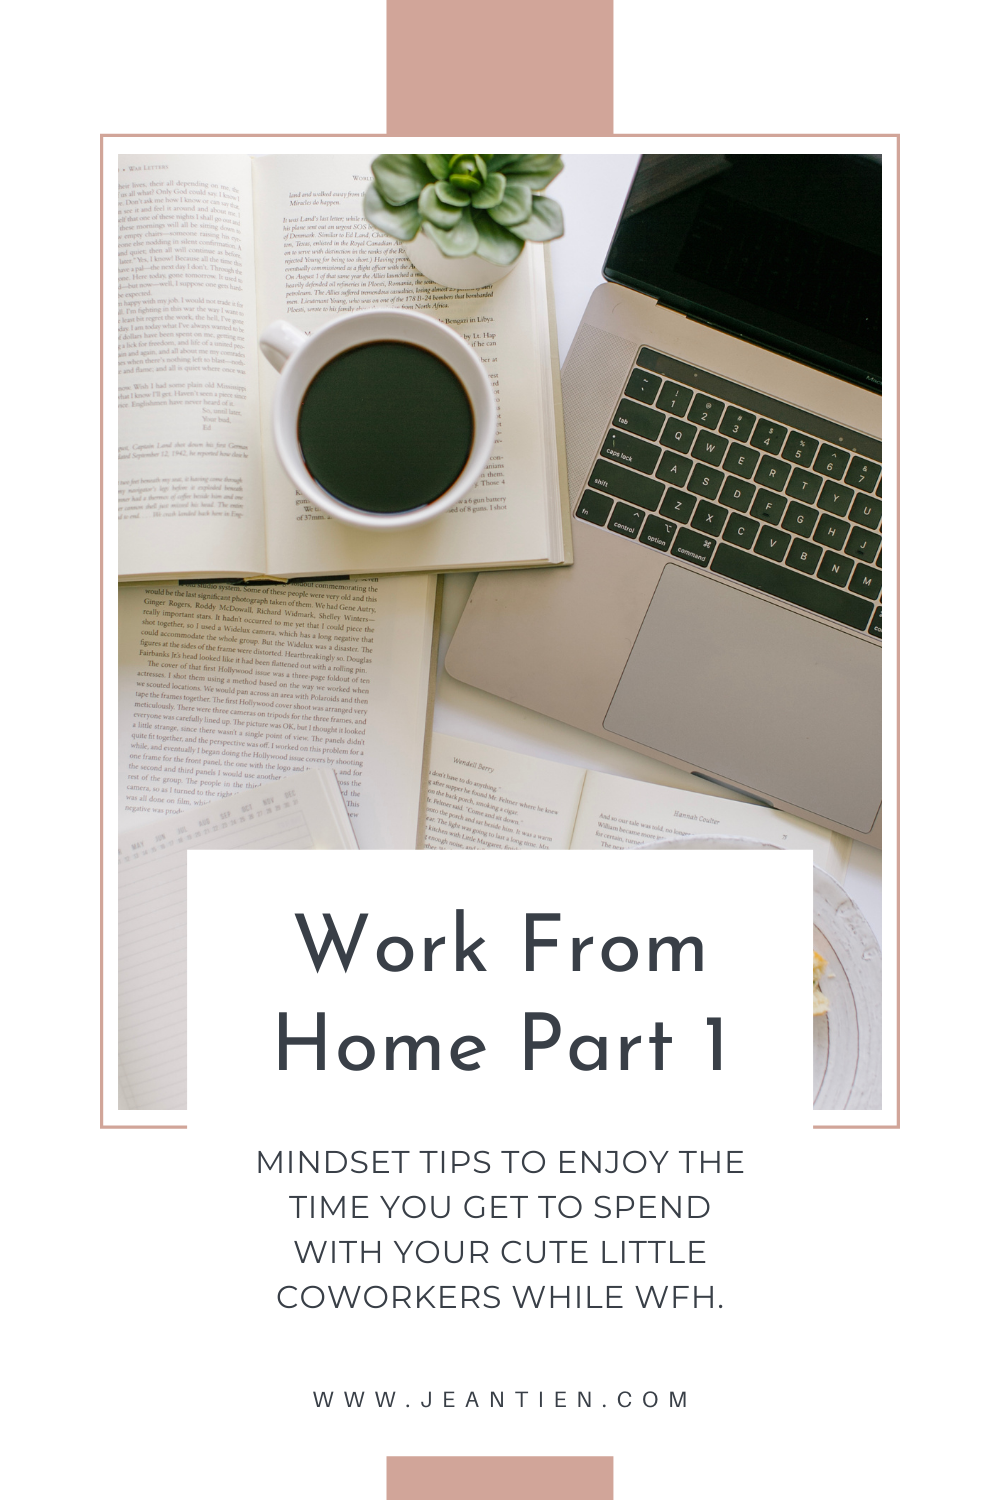 Work from Home Part 1 Blog Post